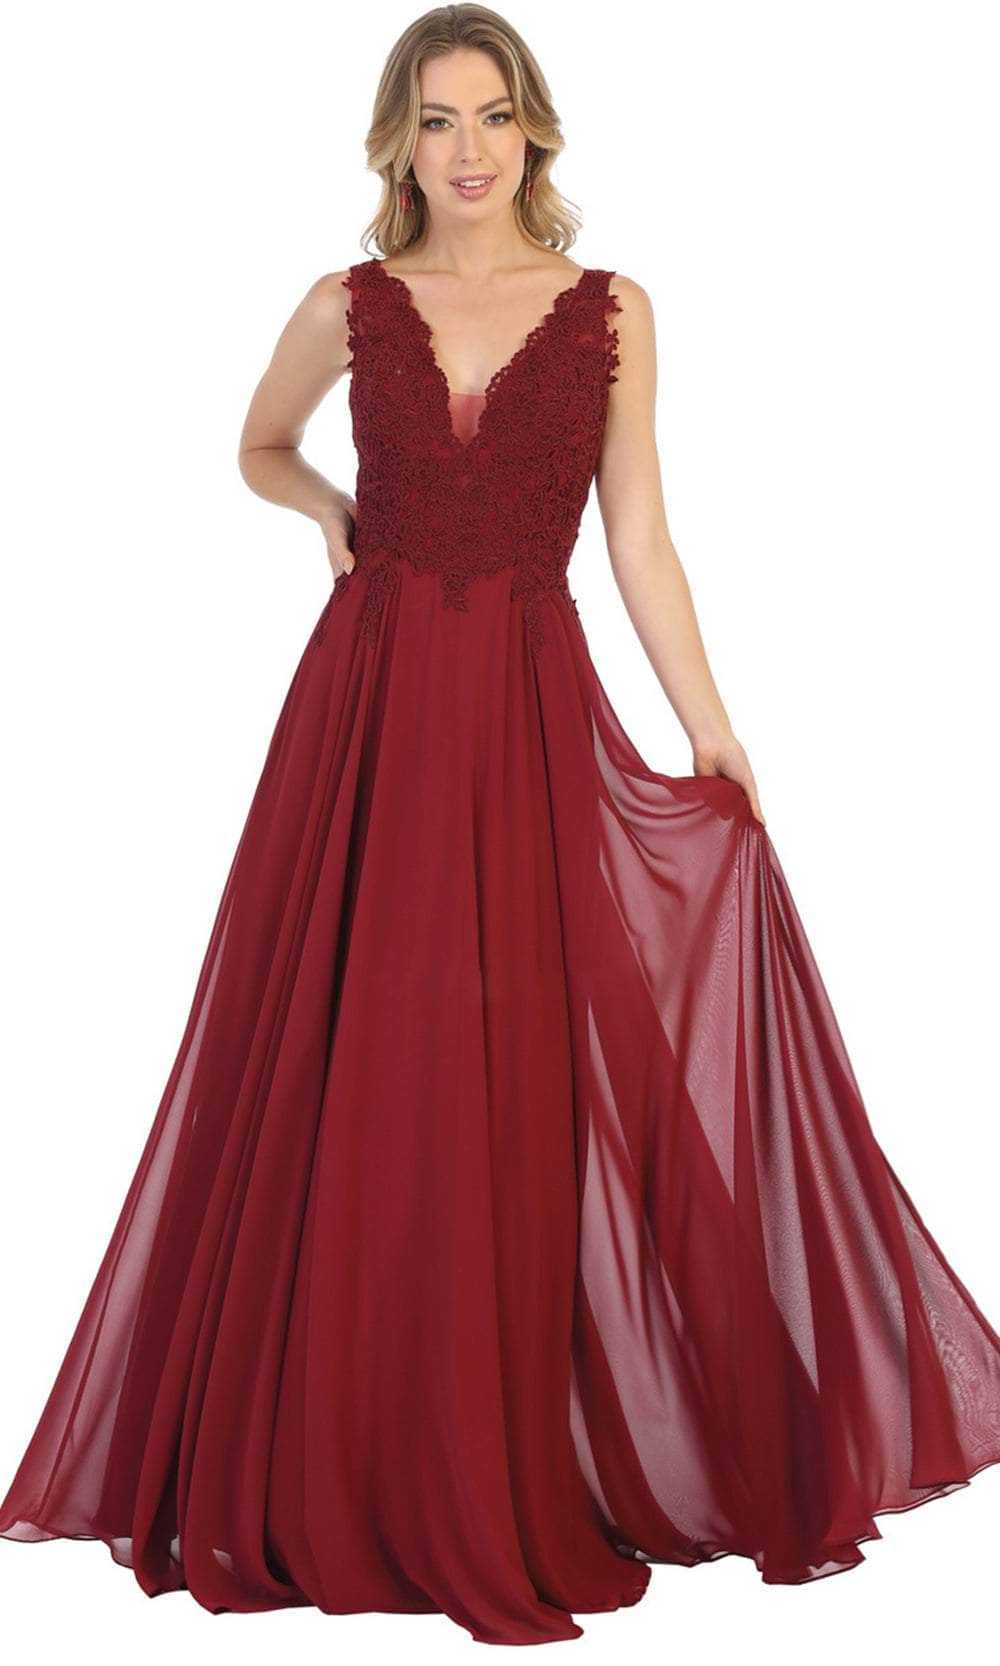 May Queen, May Queen MQ1754B - Laced A-Line Evening Dress